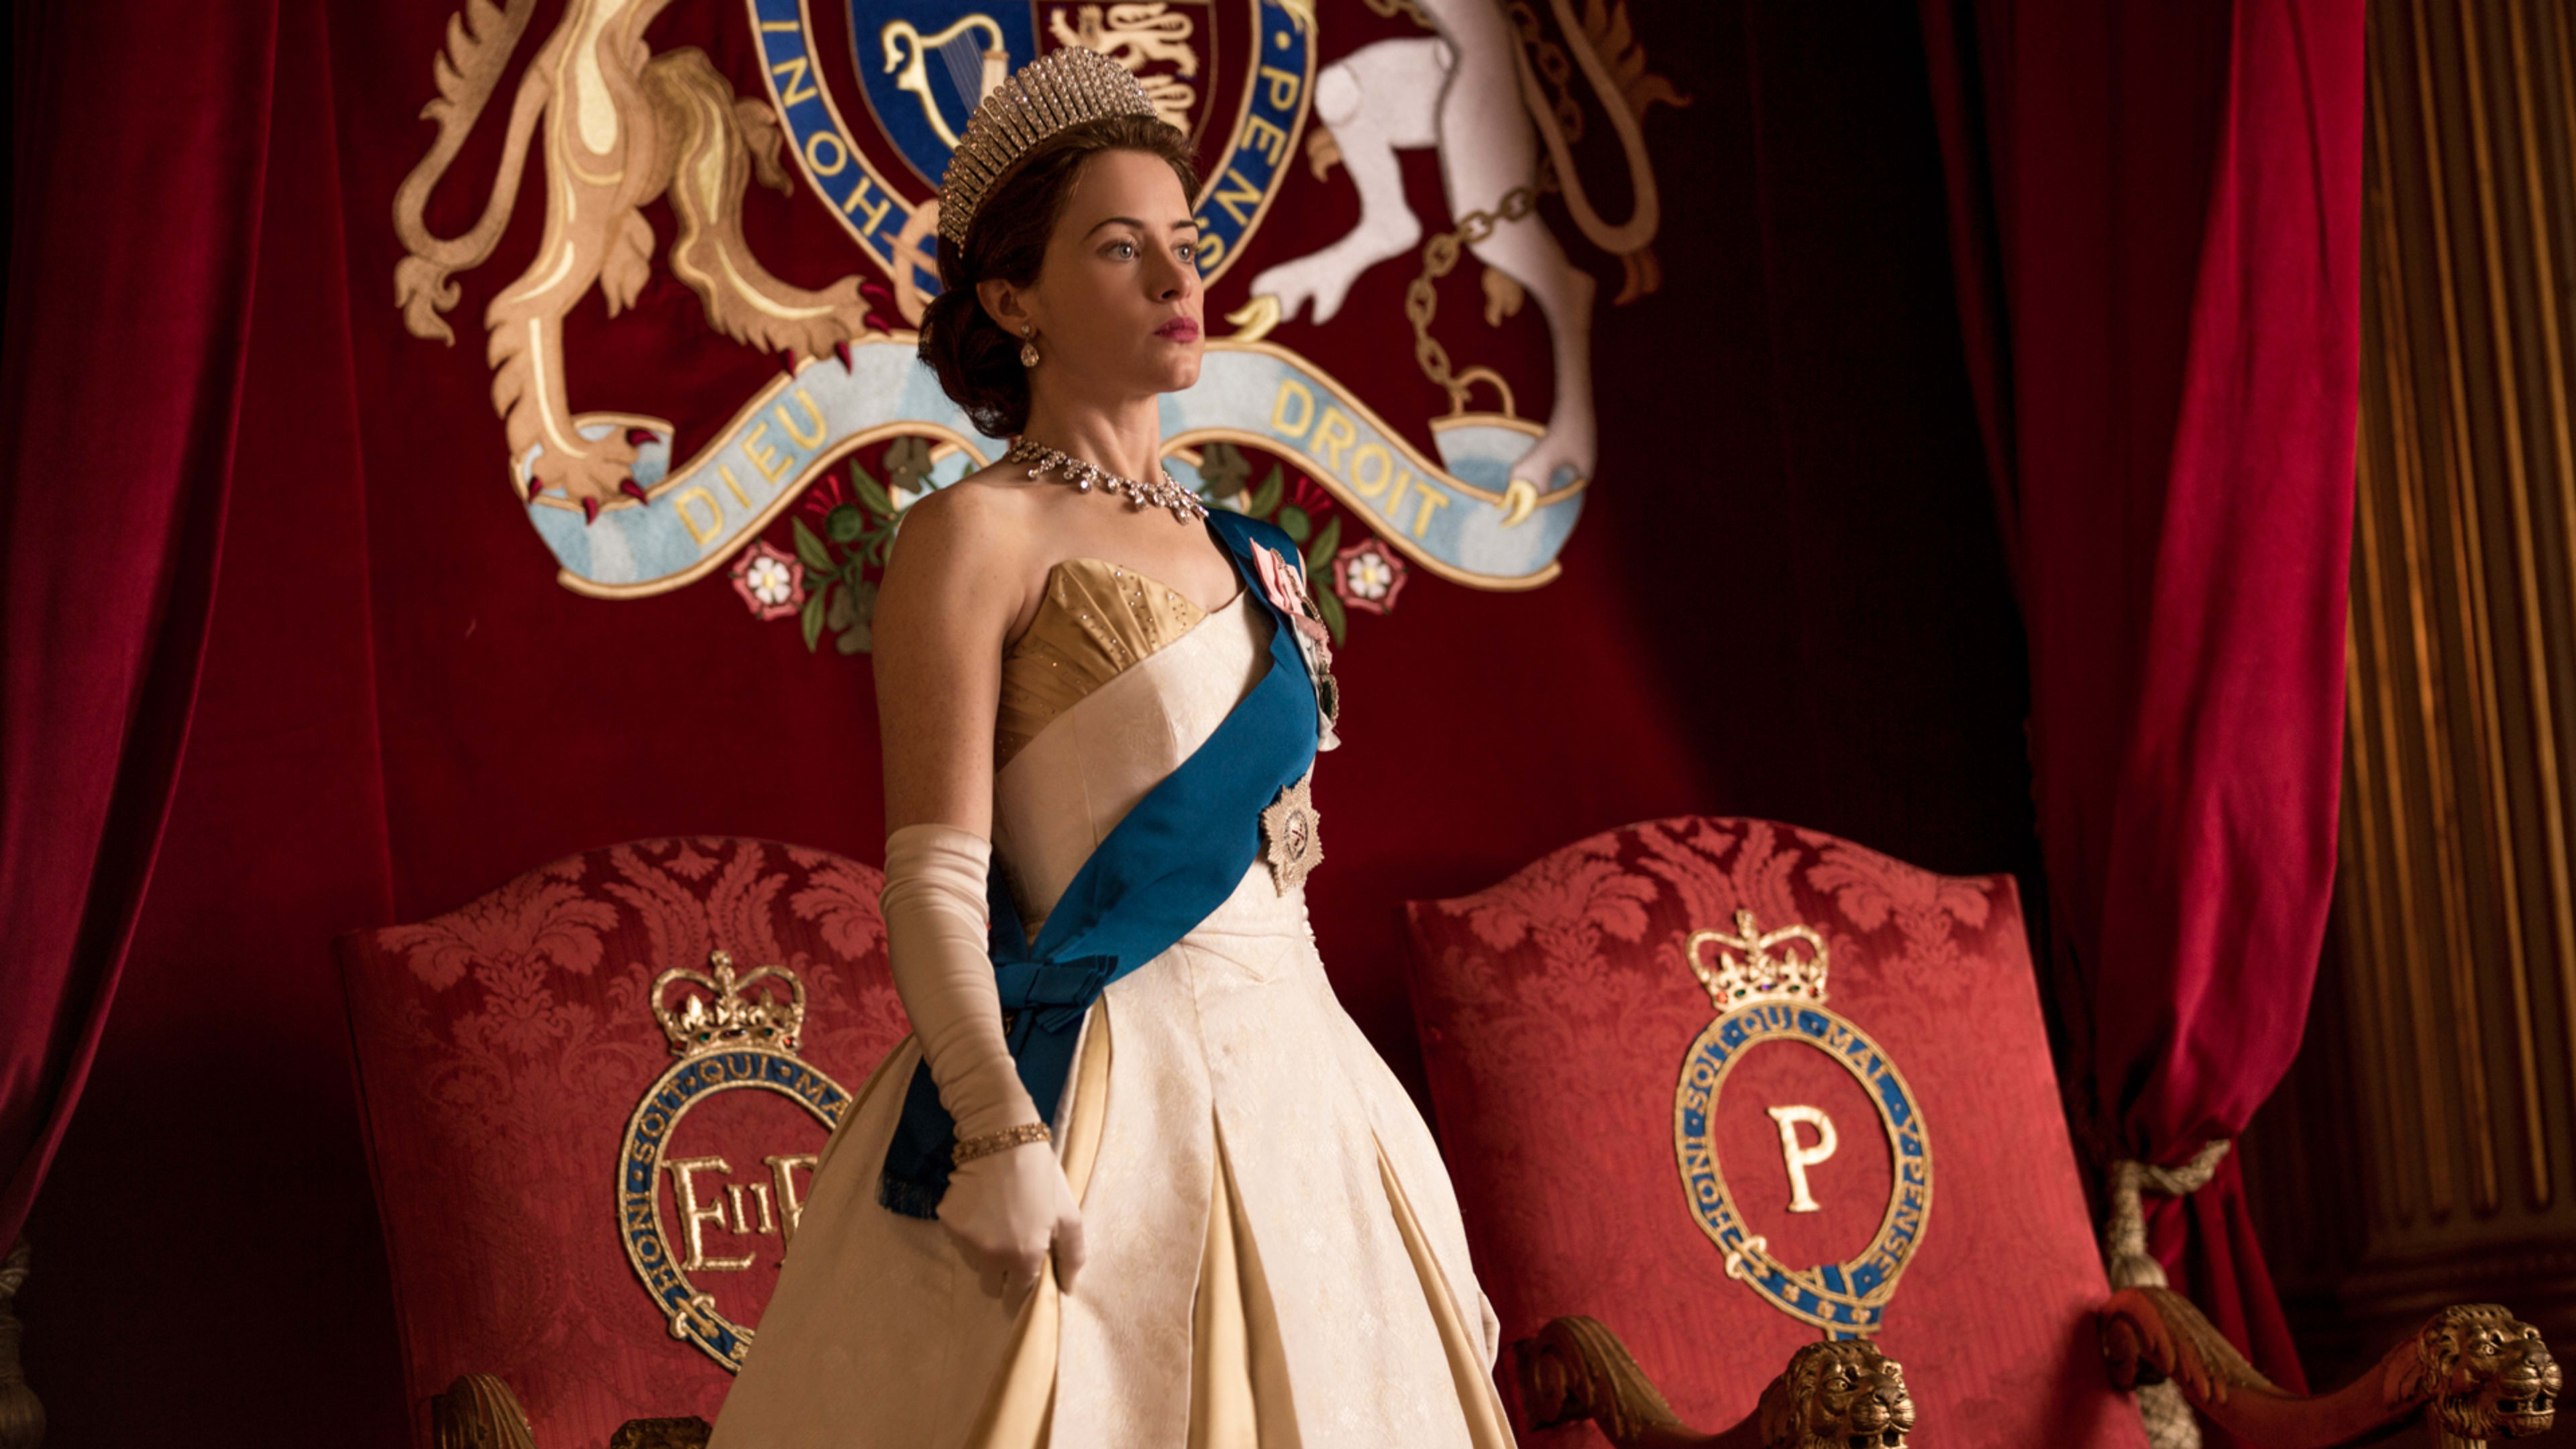 People who watch ‘The Crown’ are different than other Netflix users in two ways